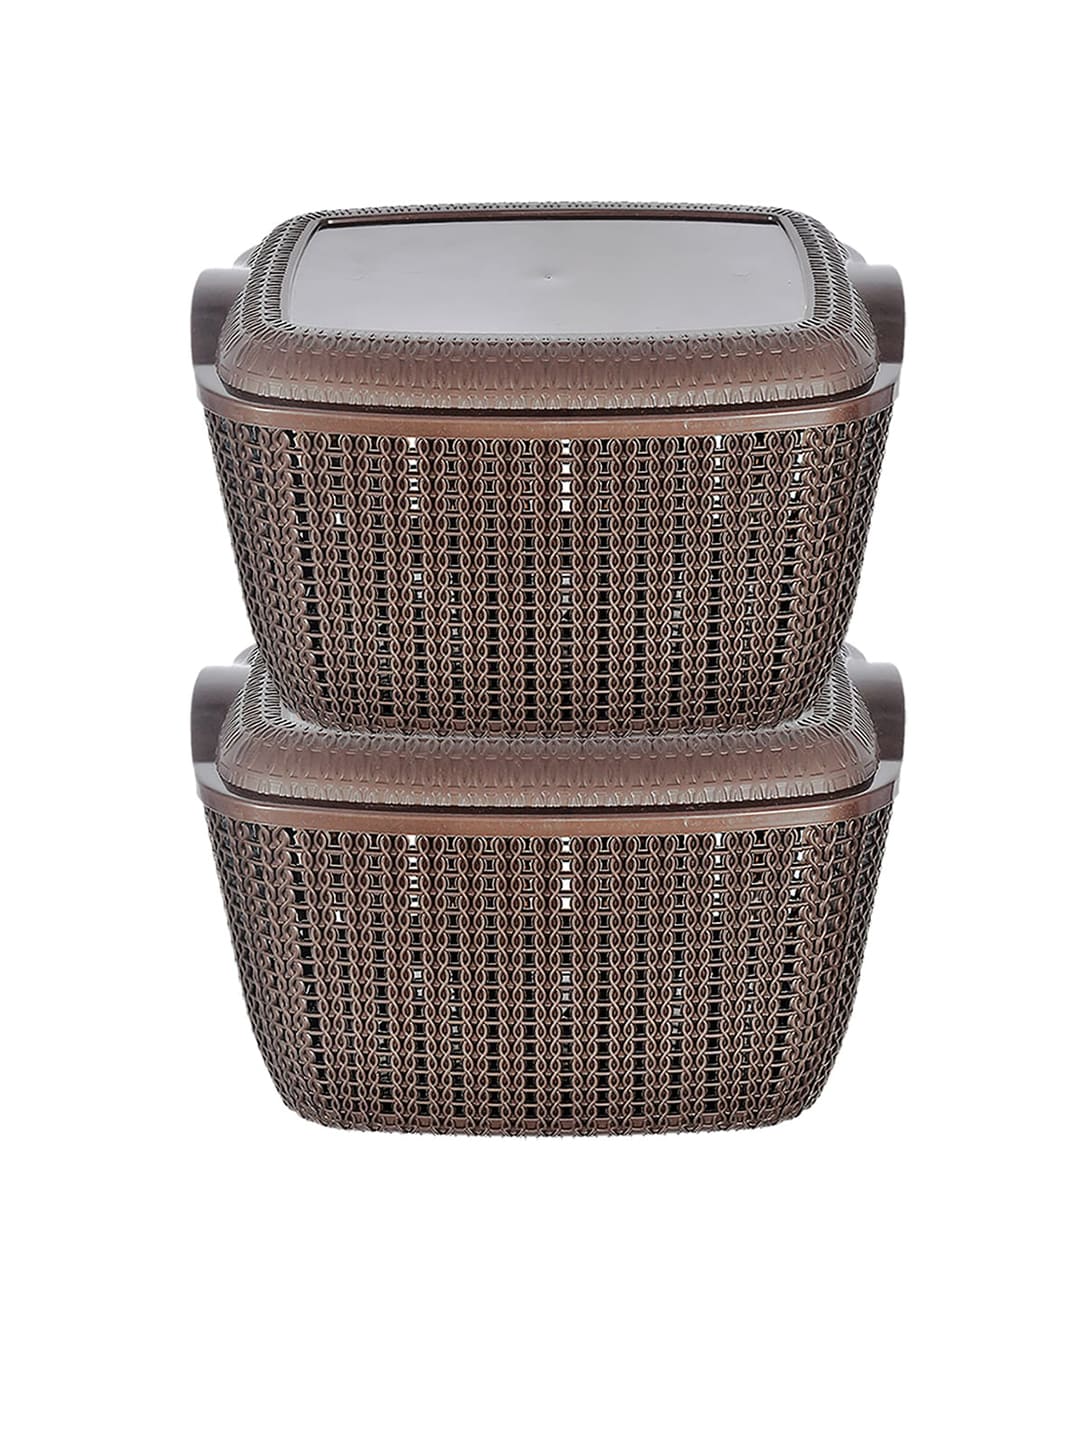 Kuber Industries Set Of 2 Multipurposes Plastic Basket With Lids Price in India